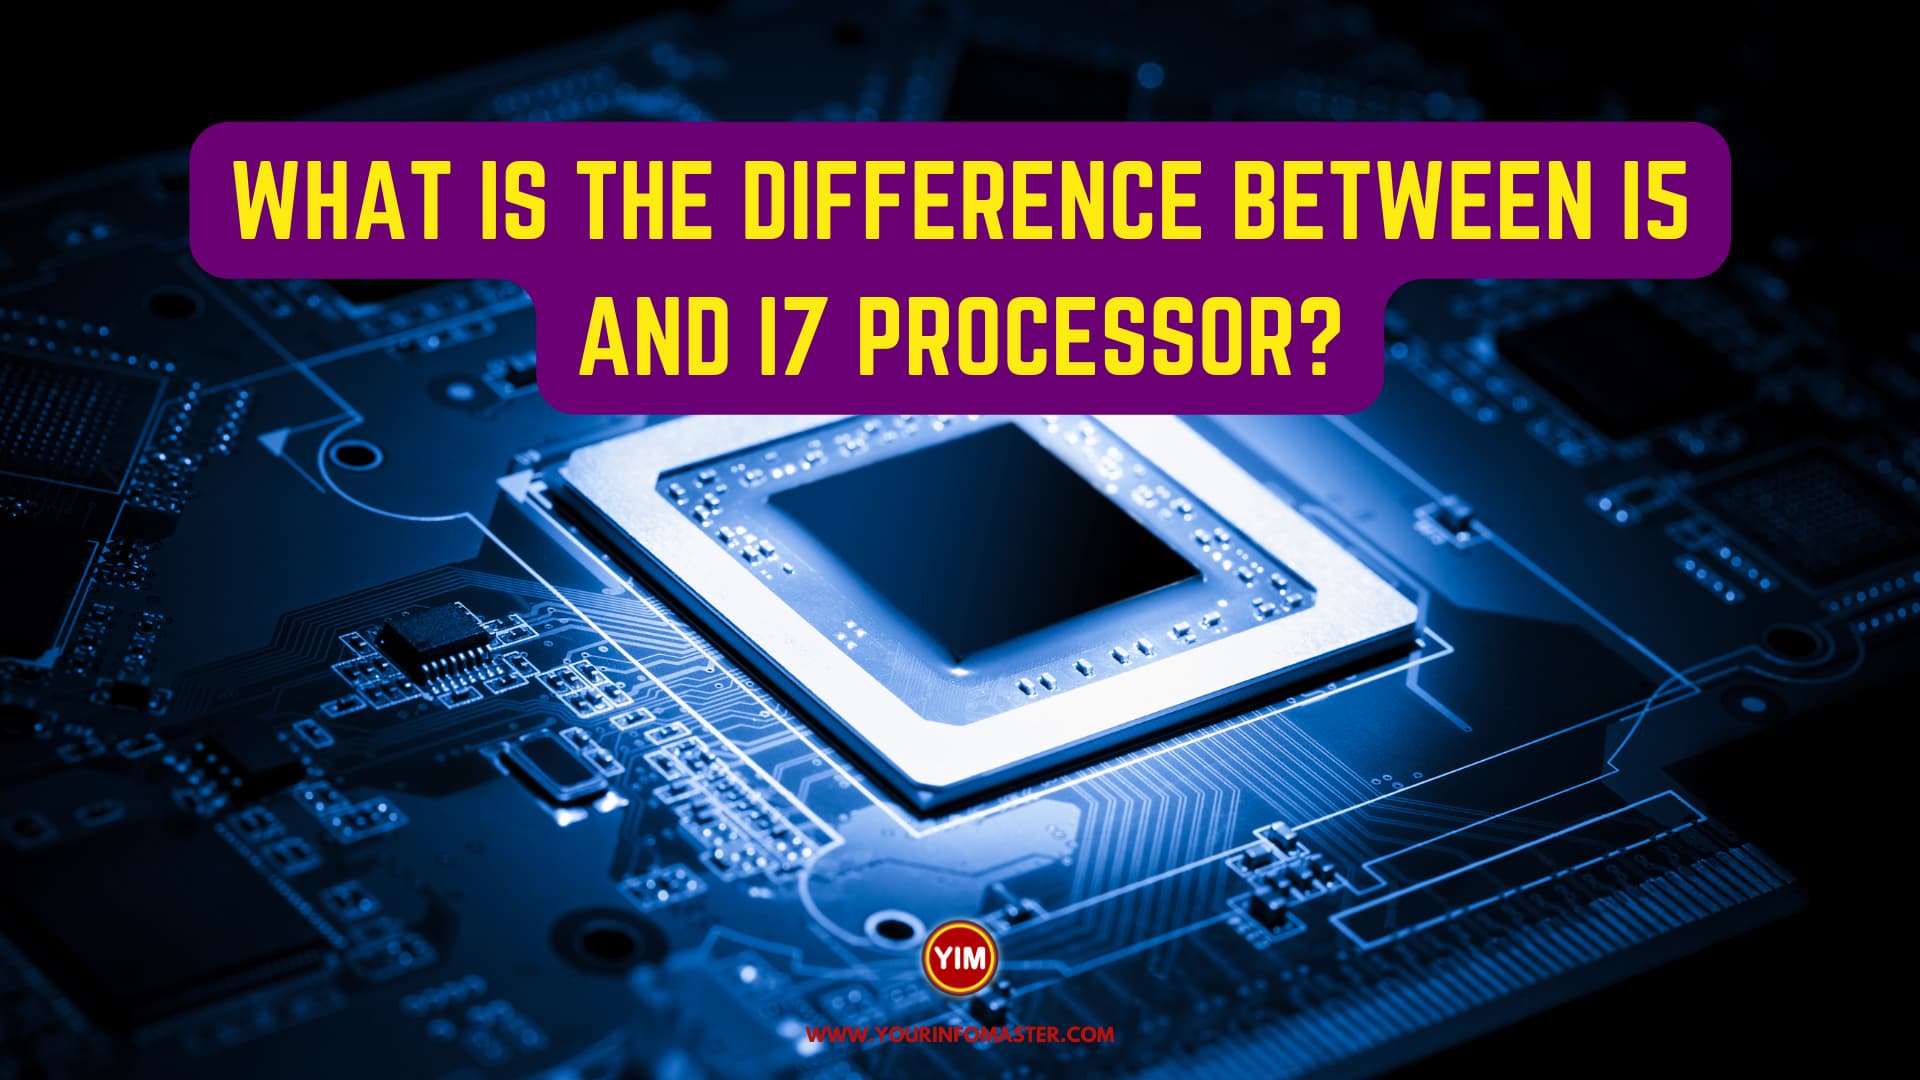 What is the difference between i5 and i7 Processor